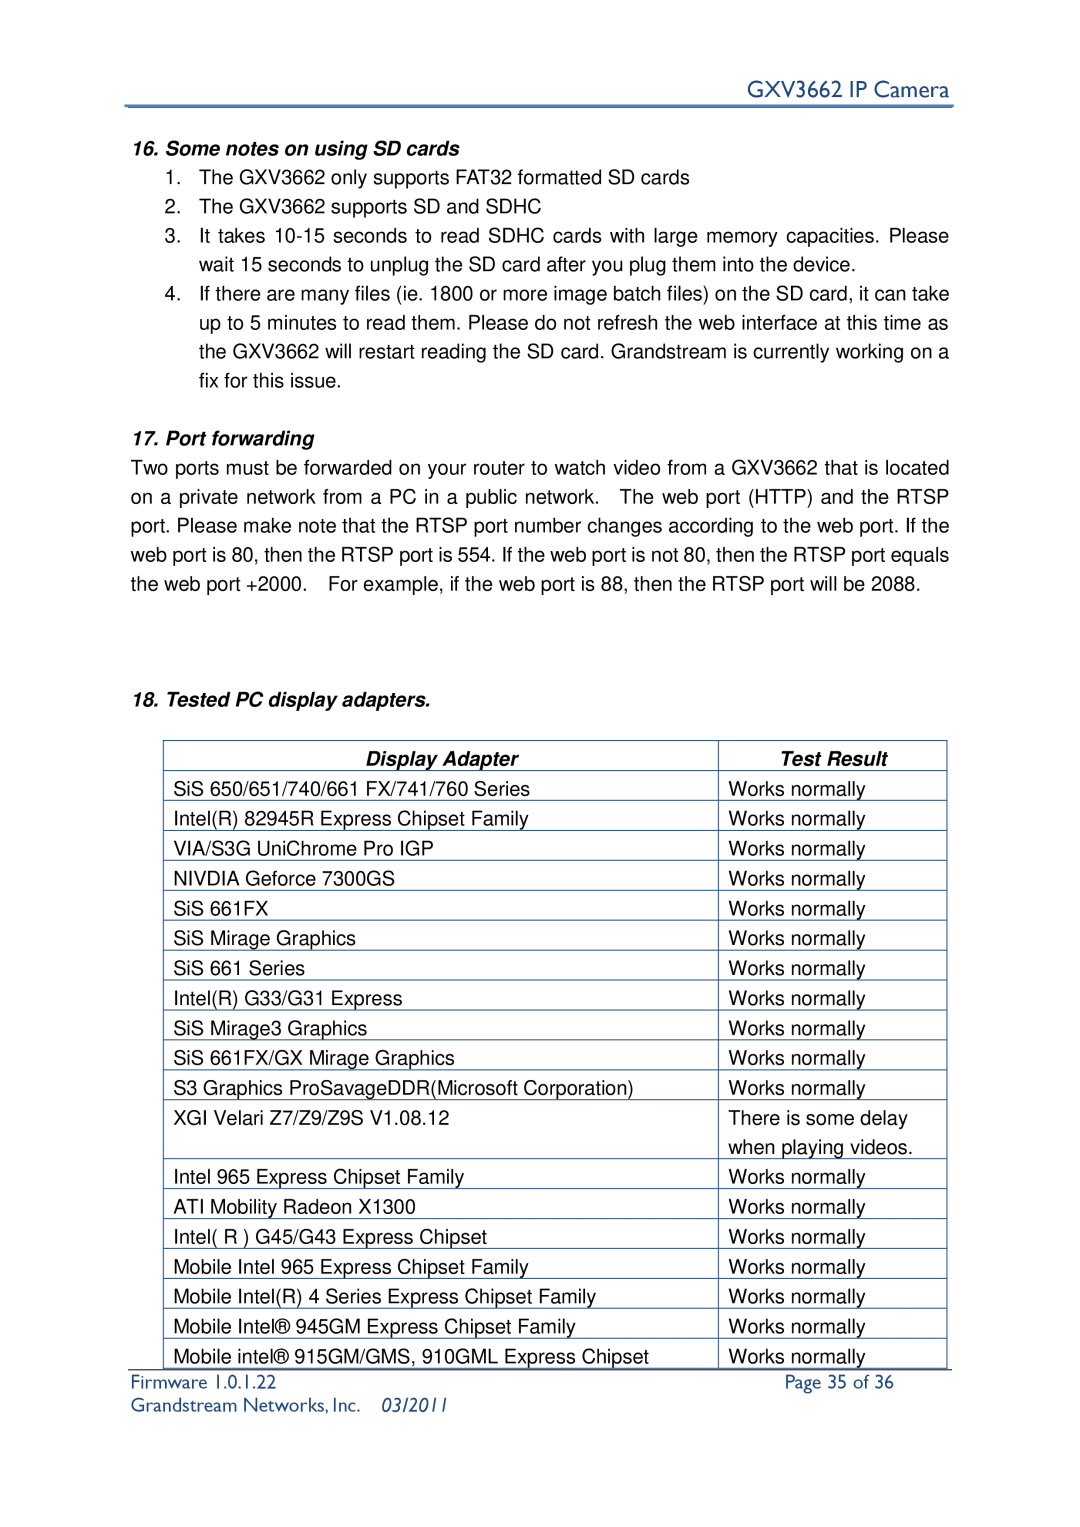 Grandstream Networks Page 35 of, GXV3662 IP Camera, Some notes on using SD cards, Port forwarding, Display Adapter 